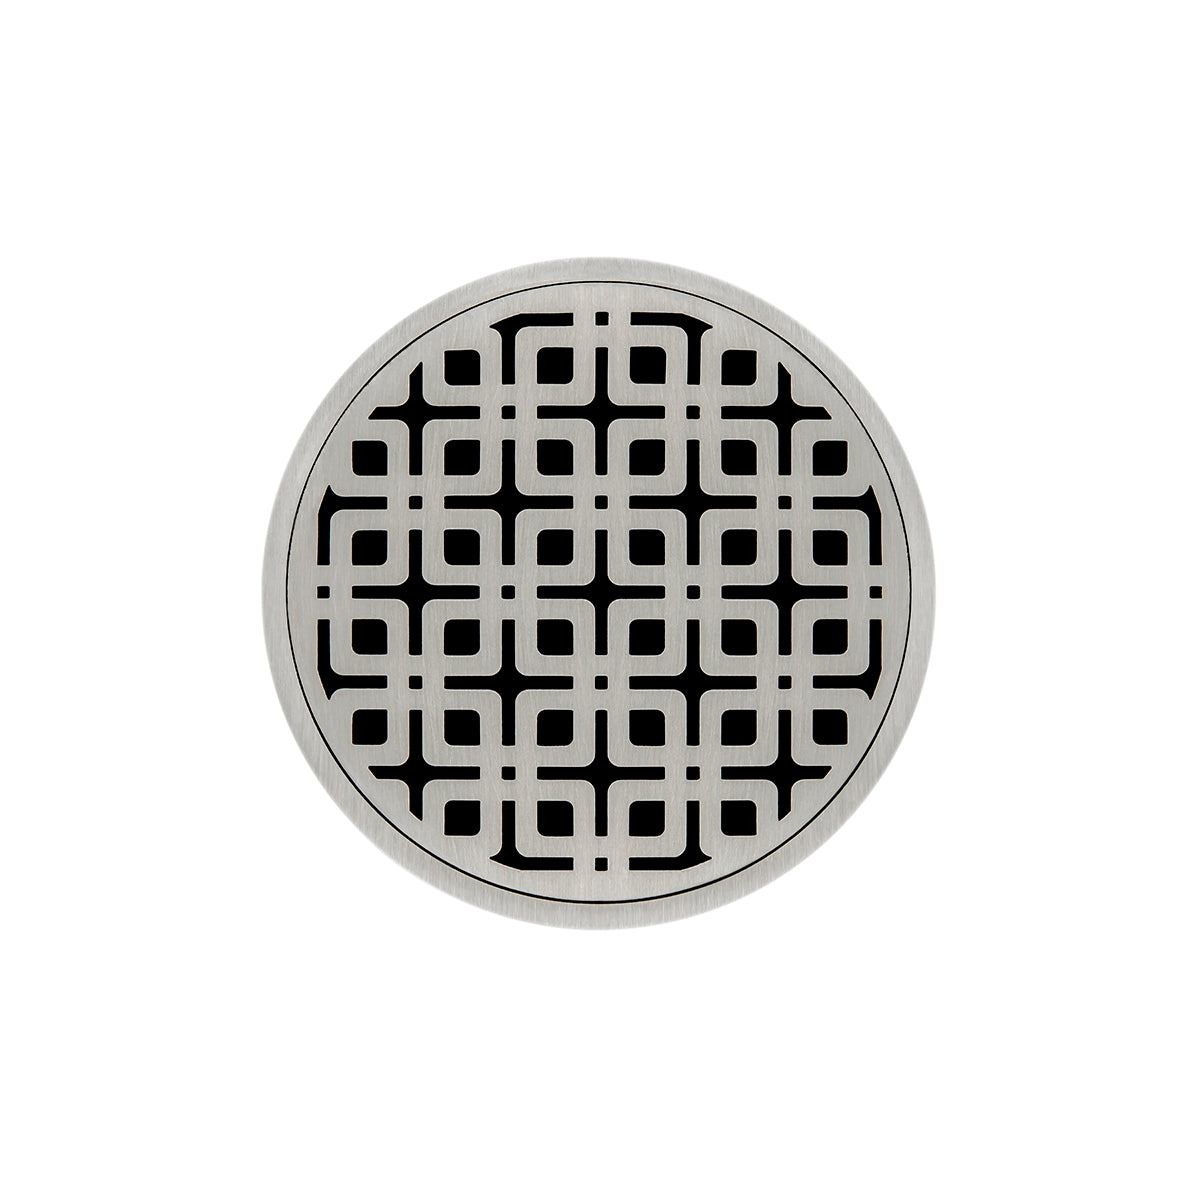 Infinity Drain 5" Round RKDB 5 Premium Center Drain Kit with Link Pattern Decorative Plate with Stainless Steel Bonded Flange Drain Body, 2" No Hub Outlet